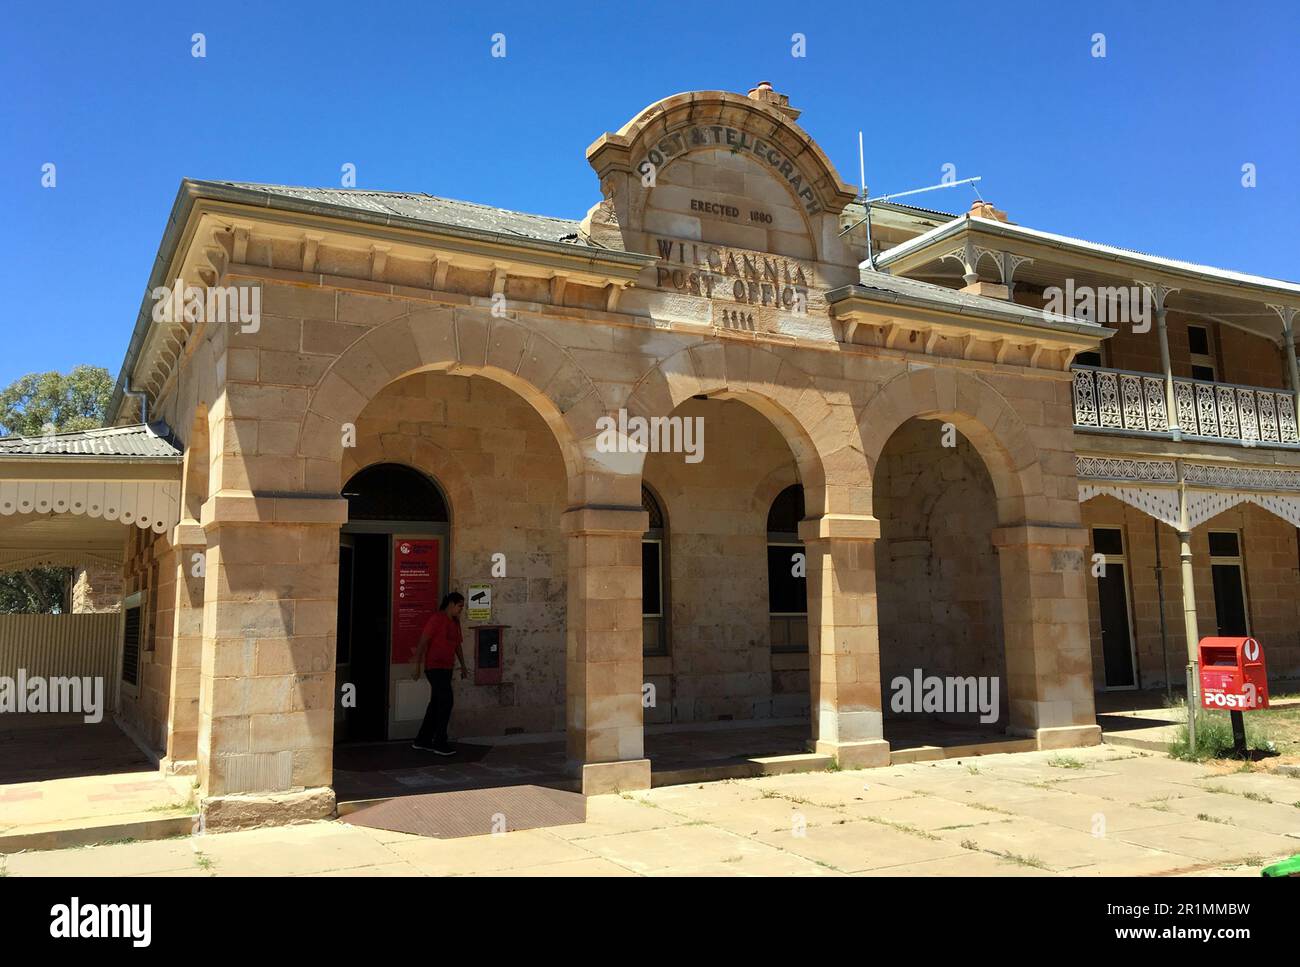 Court House and Post Office in Wilcannia country town in central NSW, Australia Stock Photo